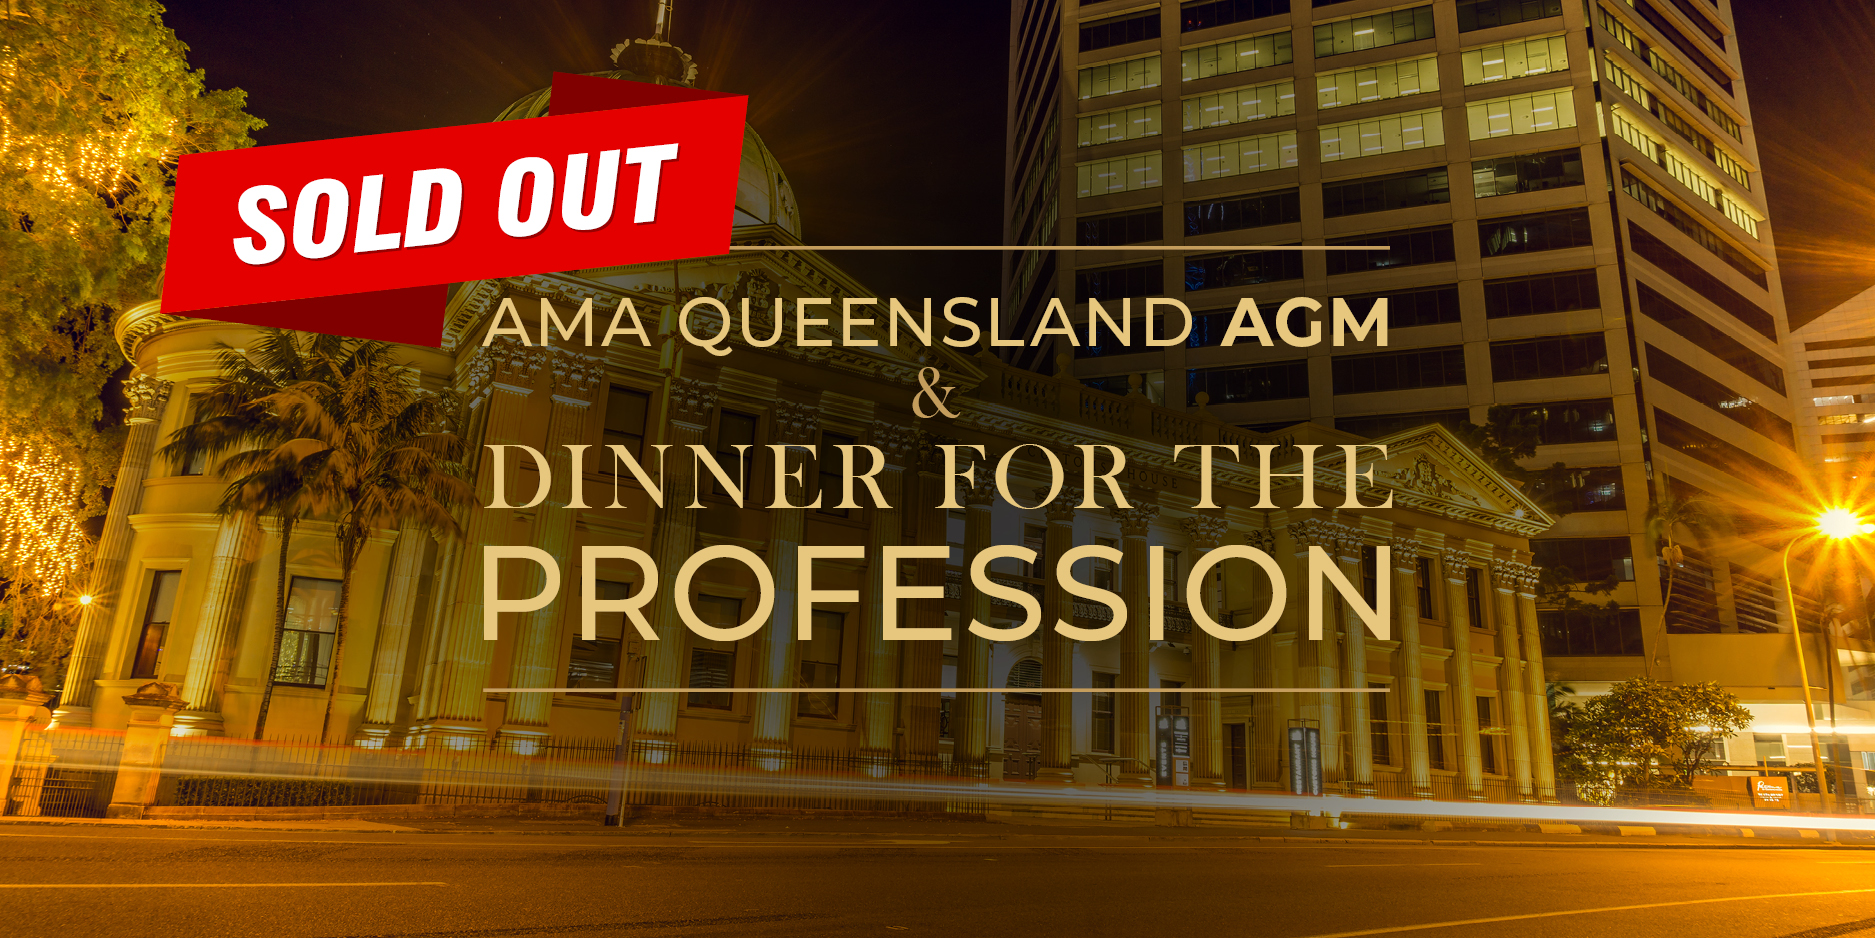 AGM and Dinner for the Profession